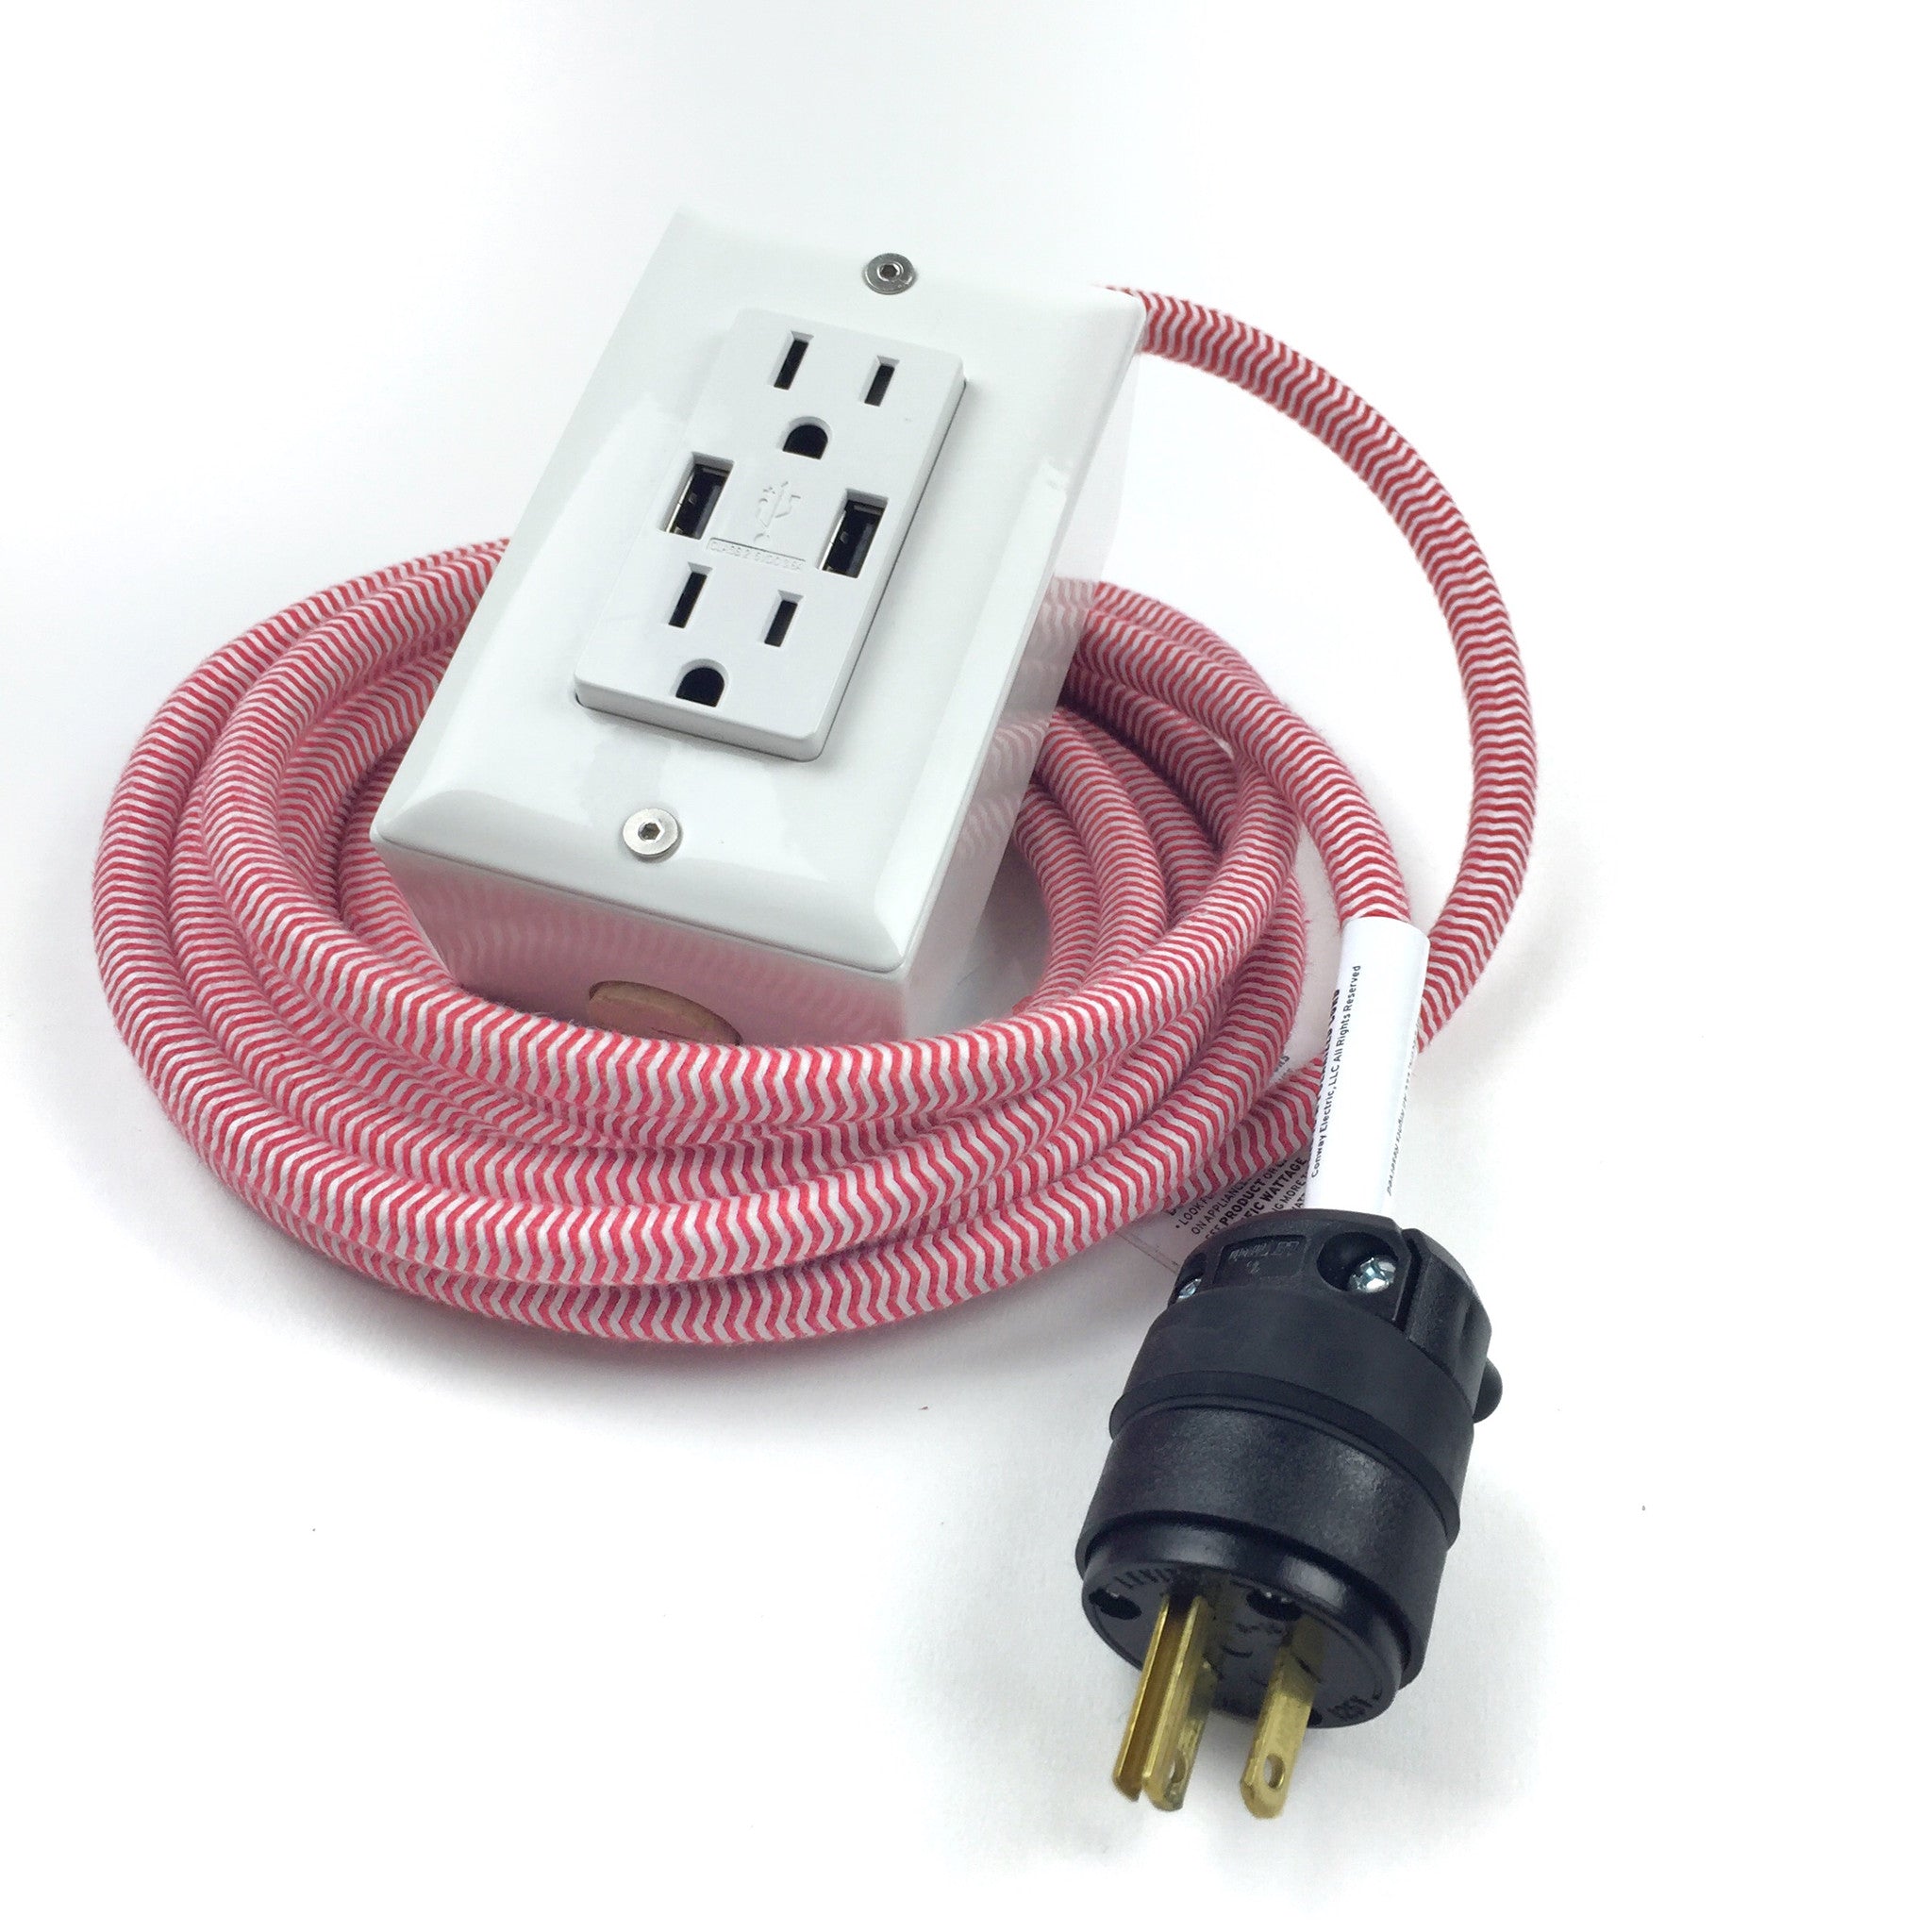 The First Smart Chip Extension Cord - 12' Extō Dual-USB, Dual-Outlet - Whitewash